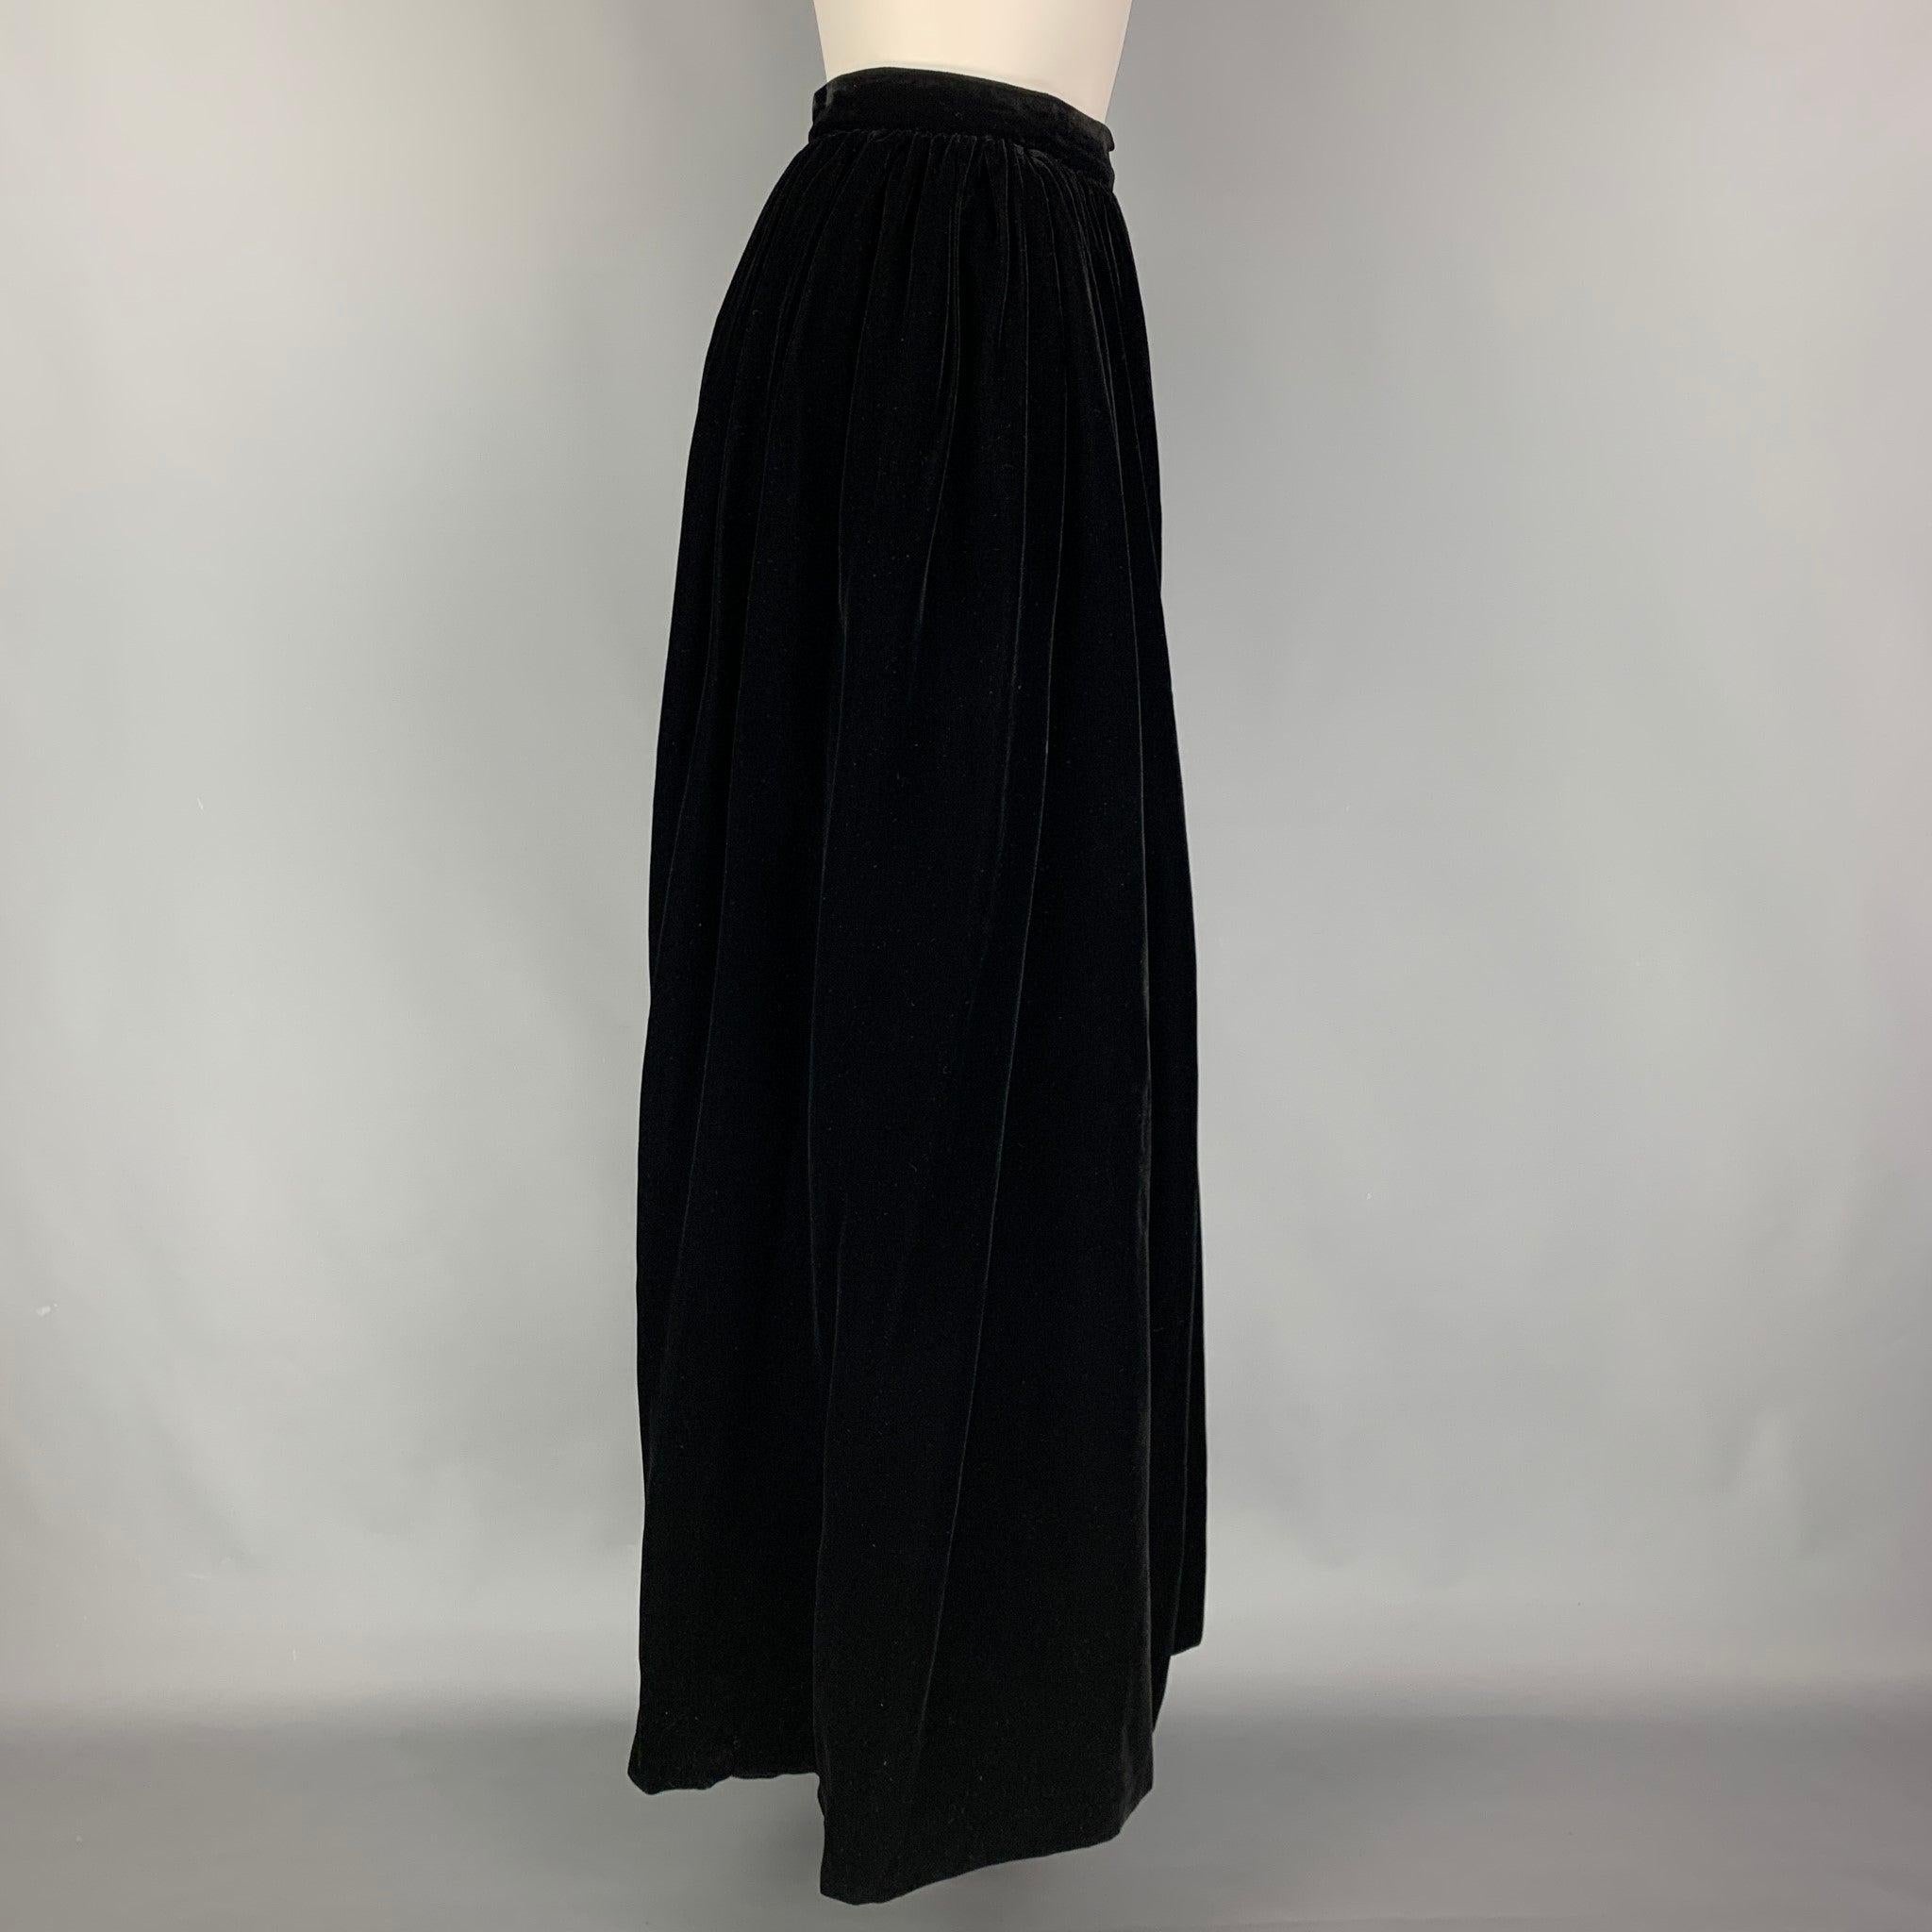 YVES SAINT LAURENT skirt comes in a black rayon featuring a pleated style and a zip up closure. Made in France.
Very Good
Pre-Owned Condition. 

Marked:   44 

Measurements: 
  Waist: 28 inches  Hip: 34 inches  Length: 44 inches 
  
  
 
Reference: